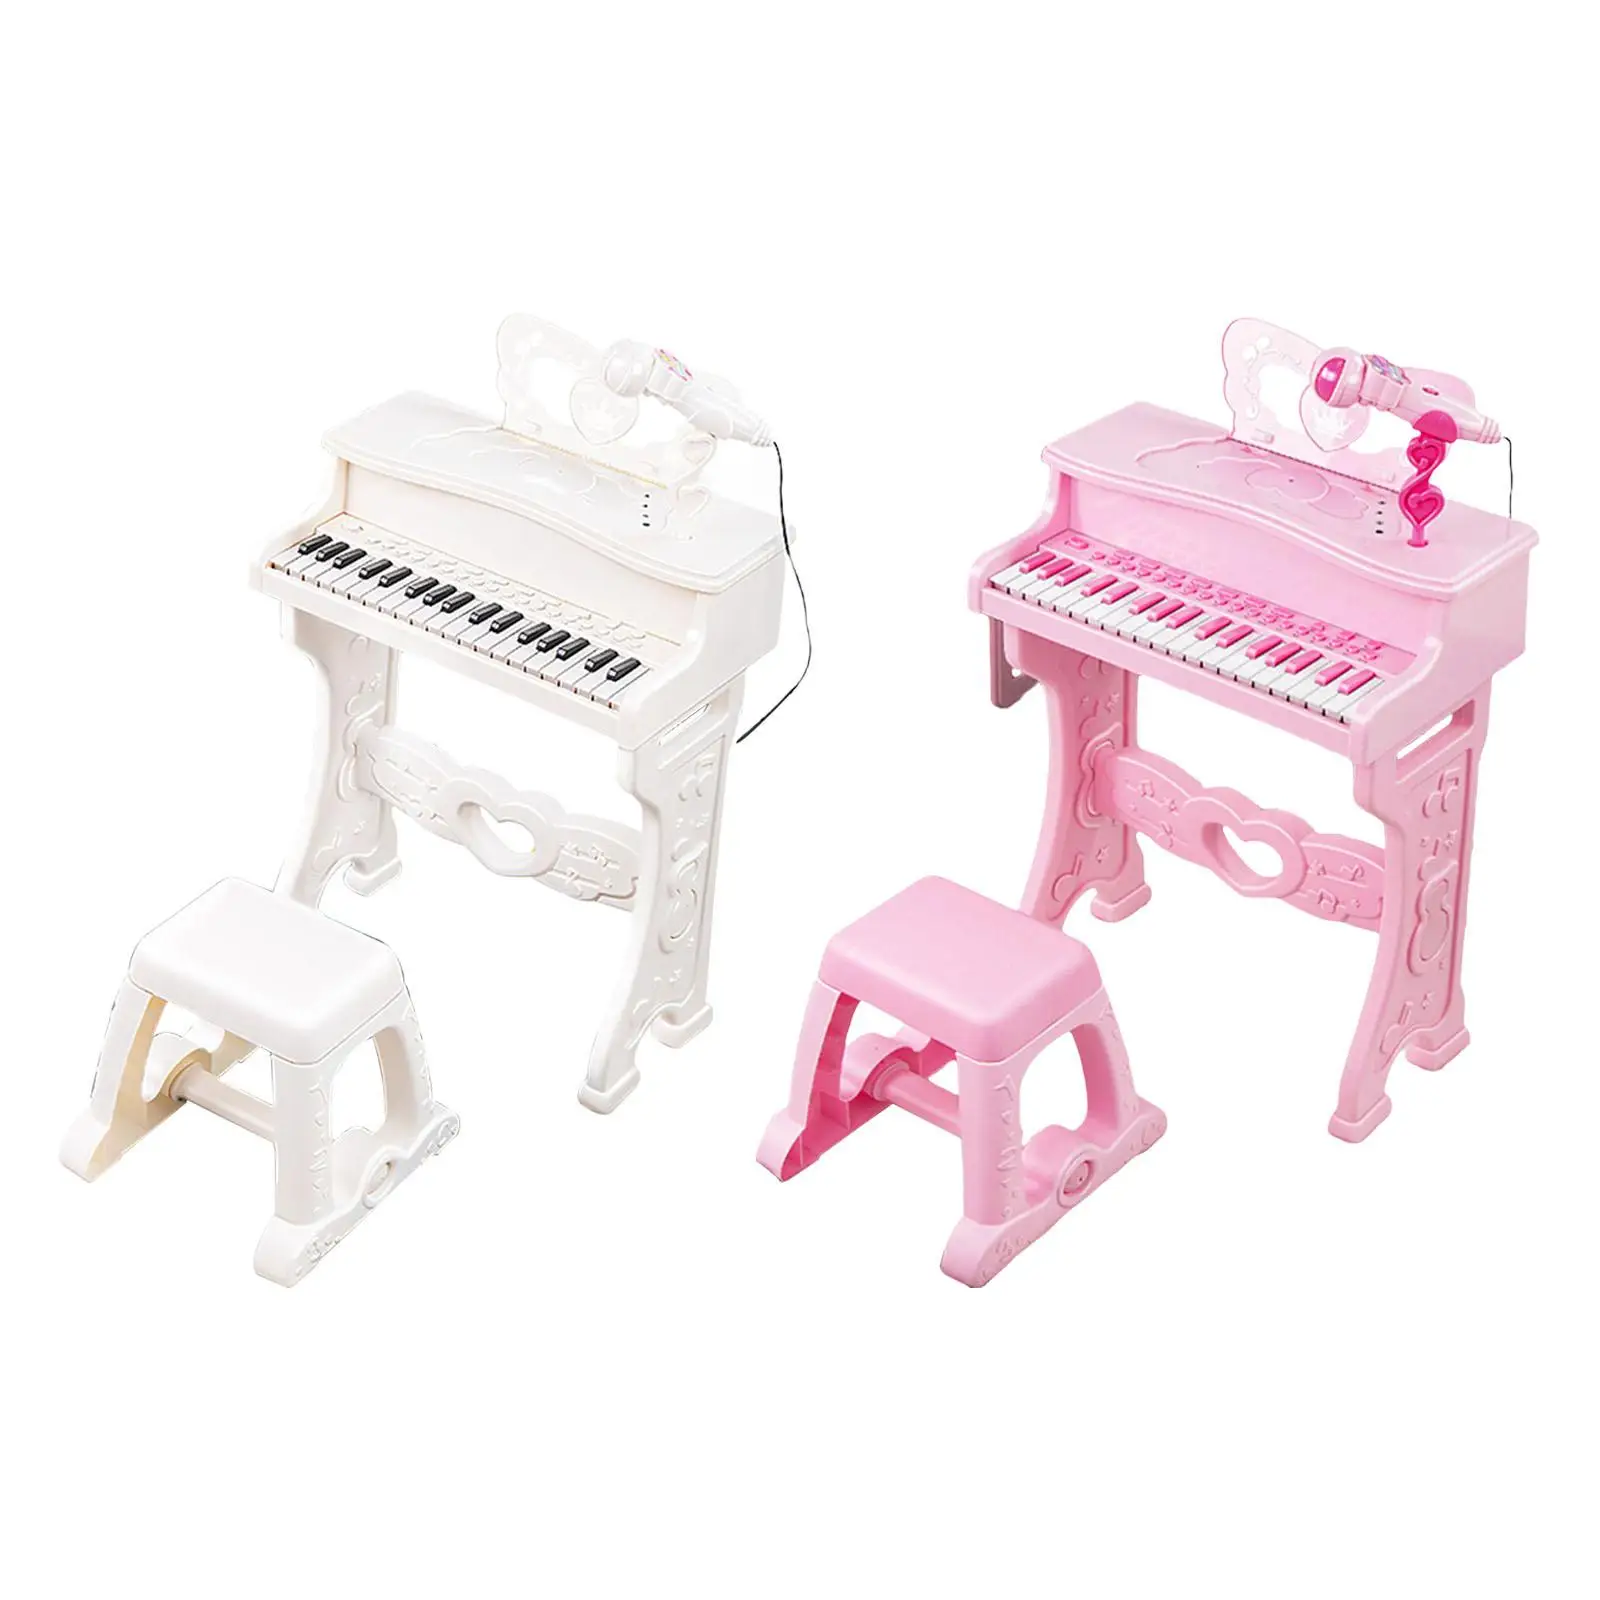 37 Key Electronic Piano Educational Toy Keyboard for Baby Children Birthday Gift